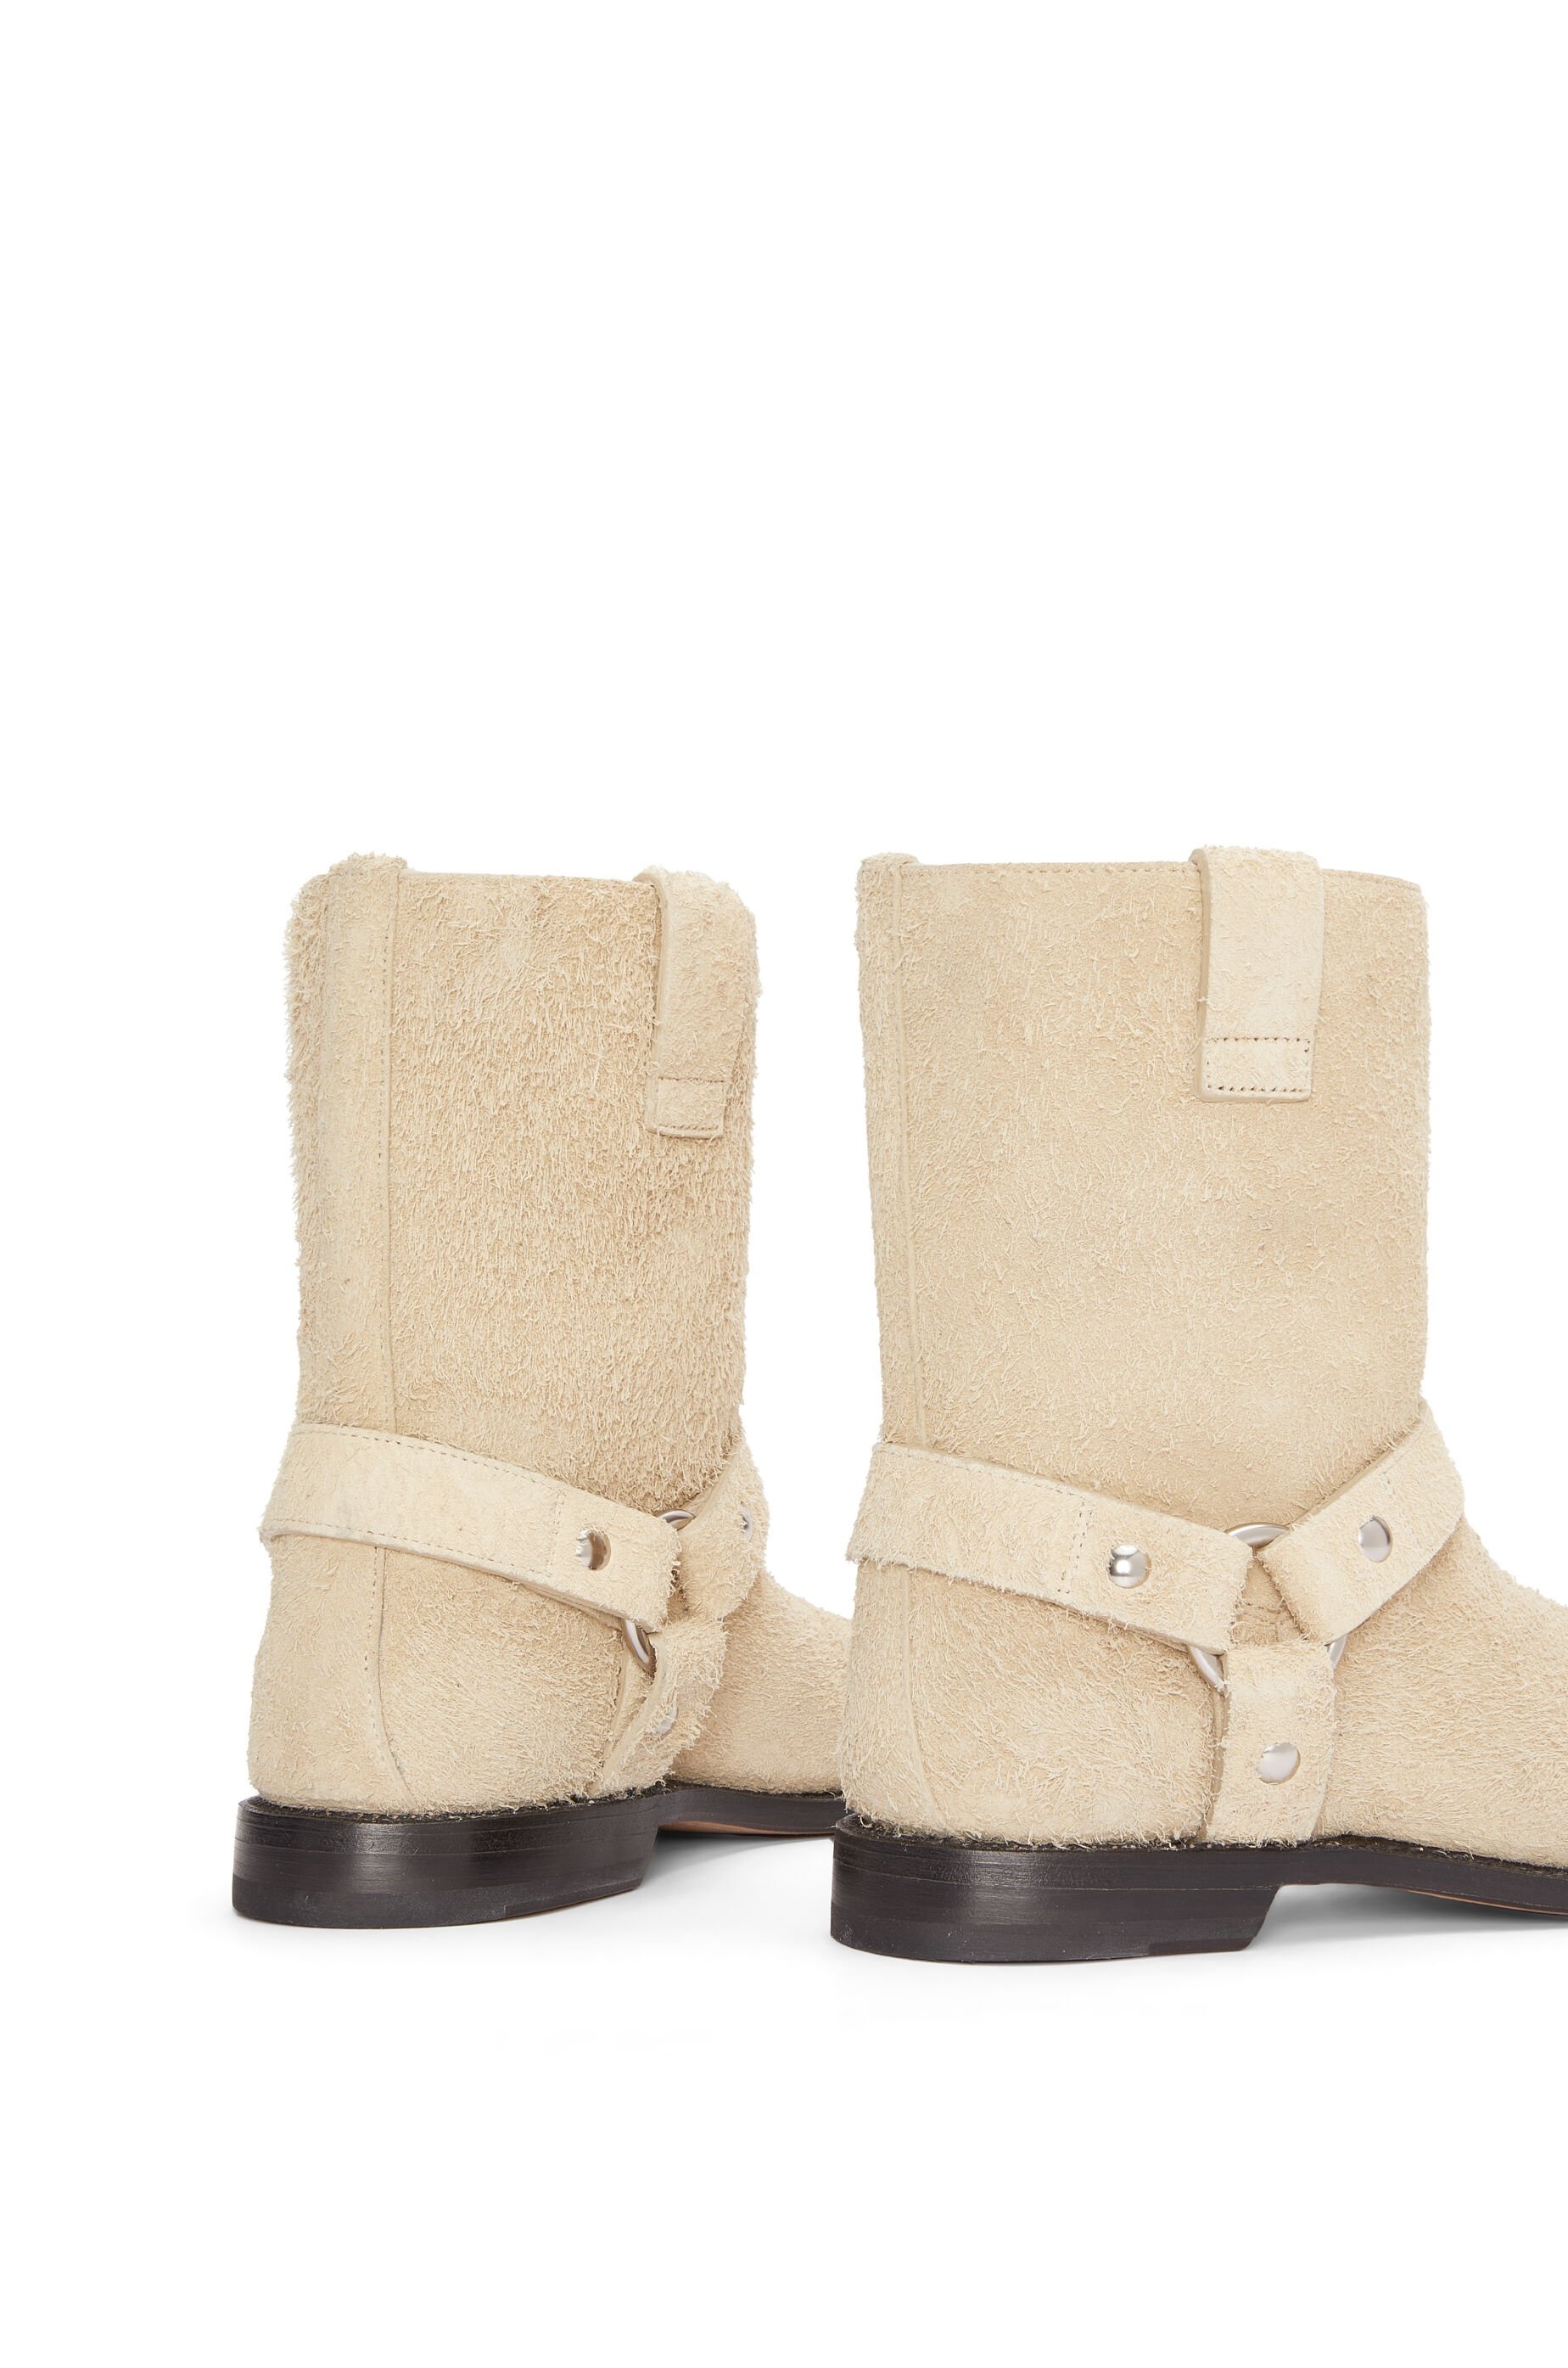 Campo Biker boot in brushed suede - 5